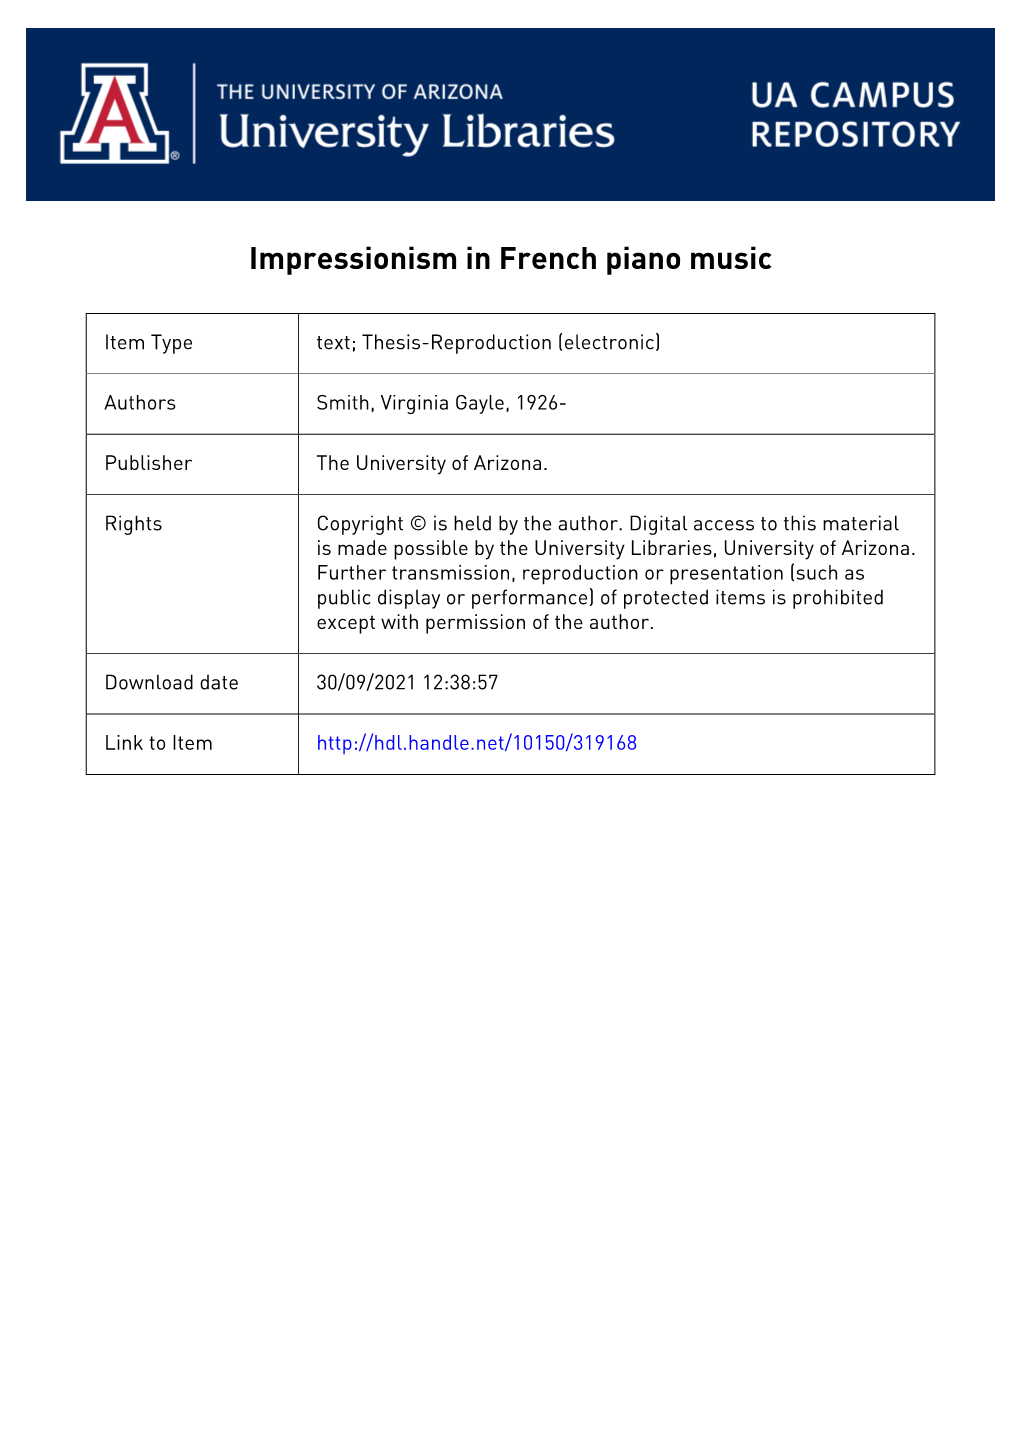 IMPRESSIONISM in FRENCH PIANO MUSIC Virginia Gayle Smith A